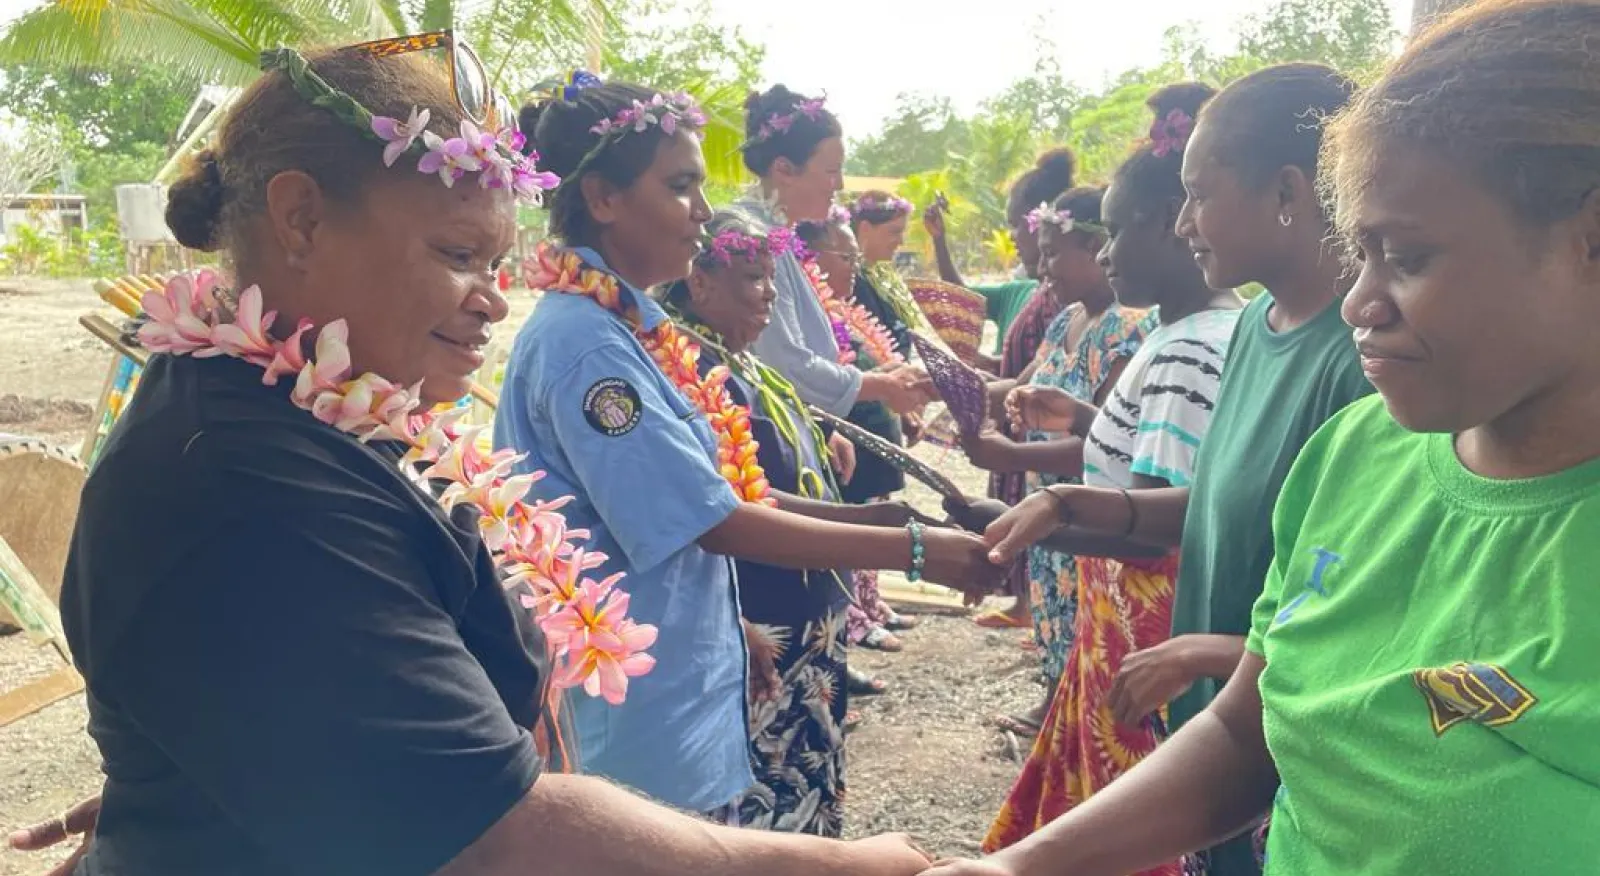 People standing in a line shaking hands, wearing flower wreaths around the necks